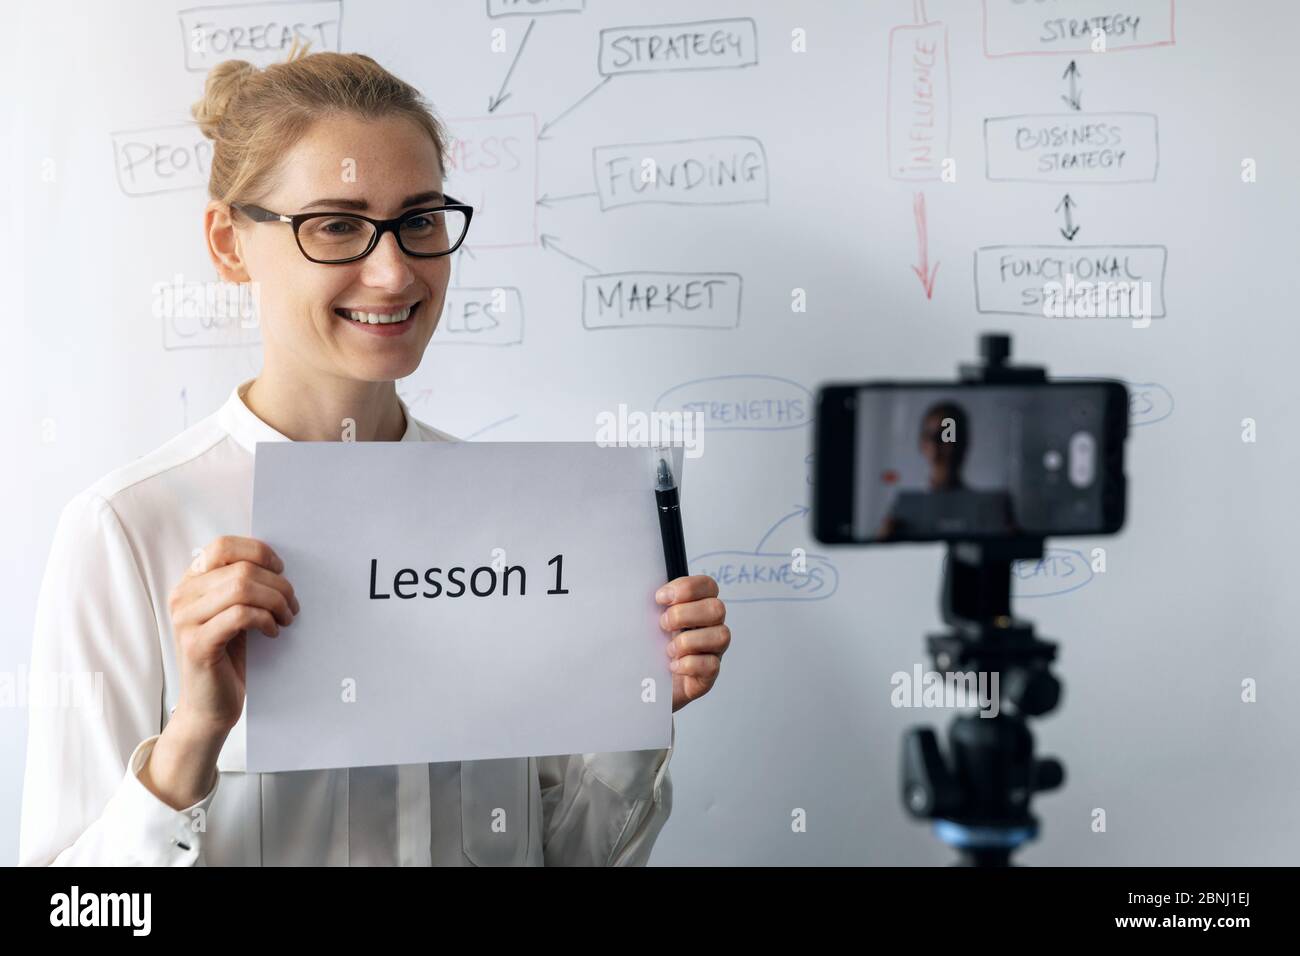 online education, webinar and business vlog concept - woman teaching and recording video with phone in front of whiteboard Stock Photo